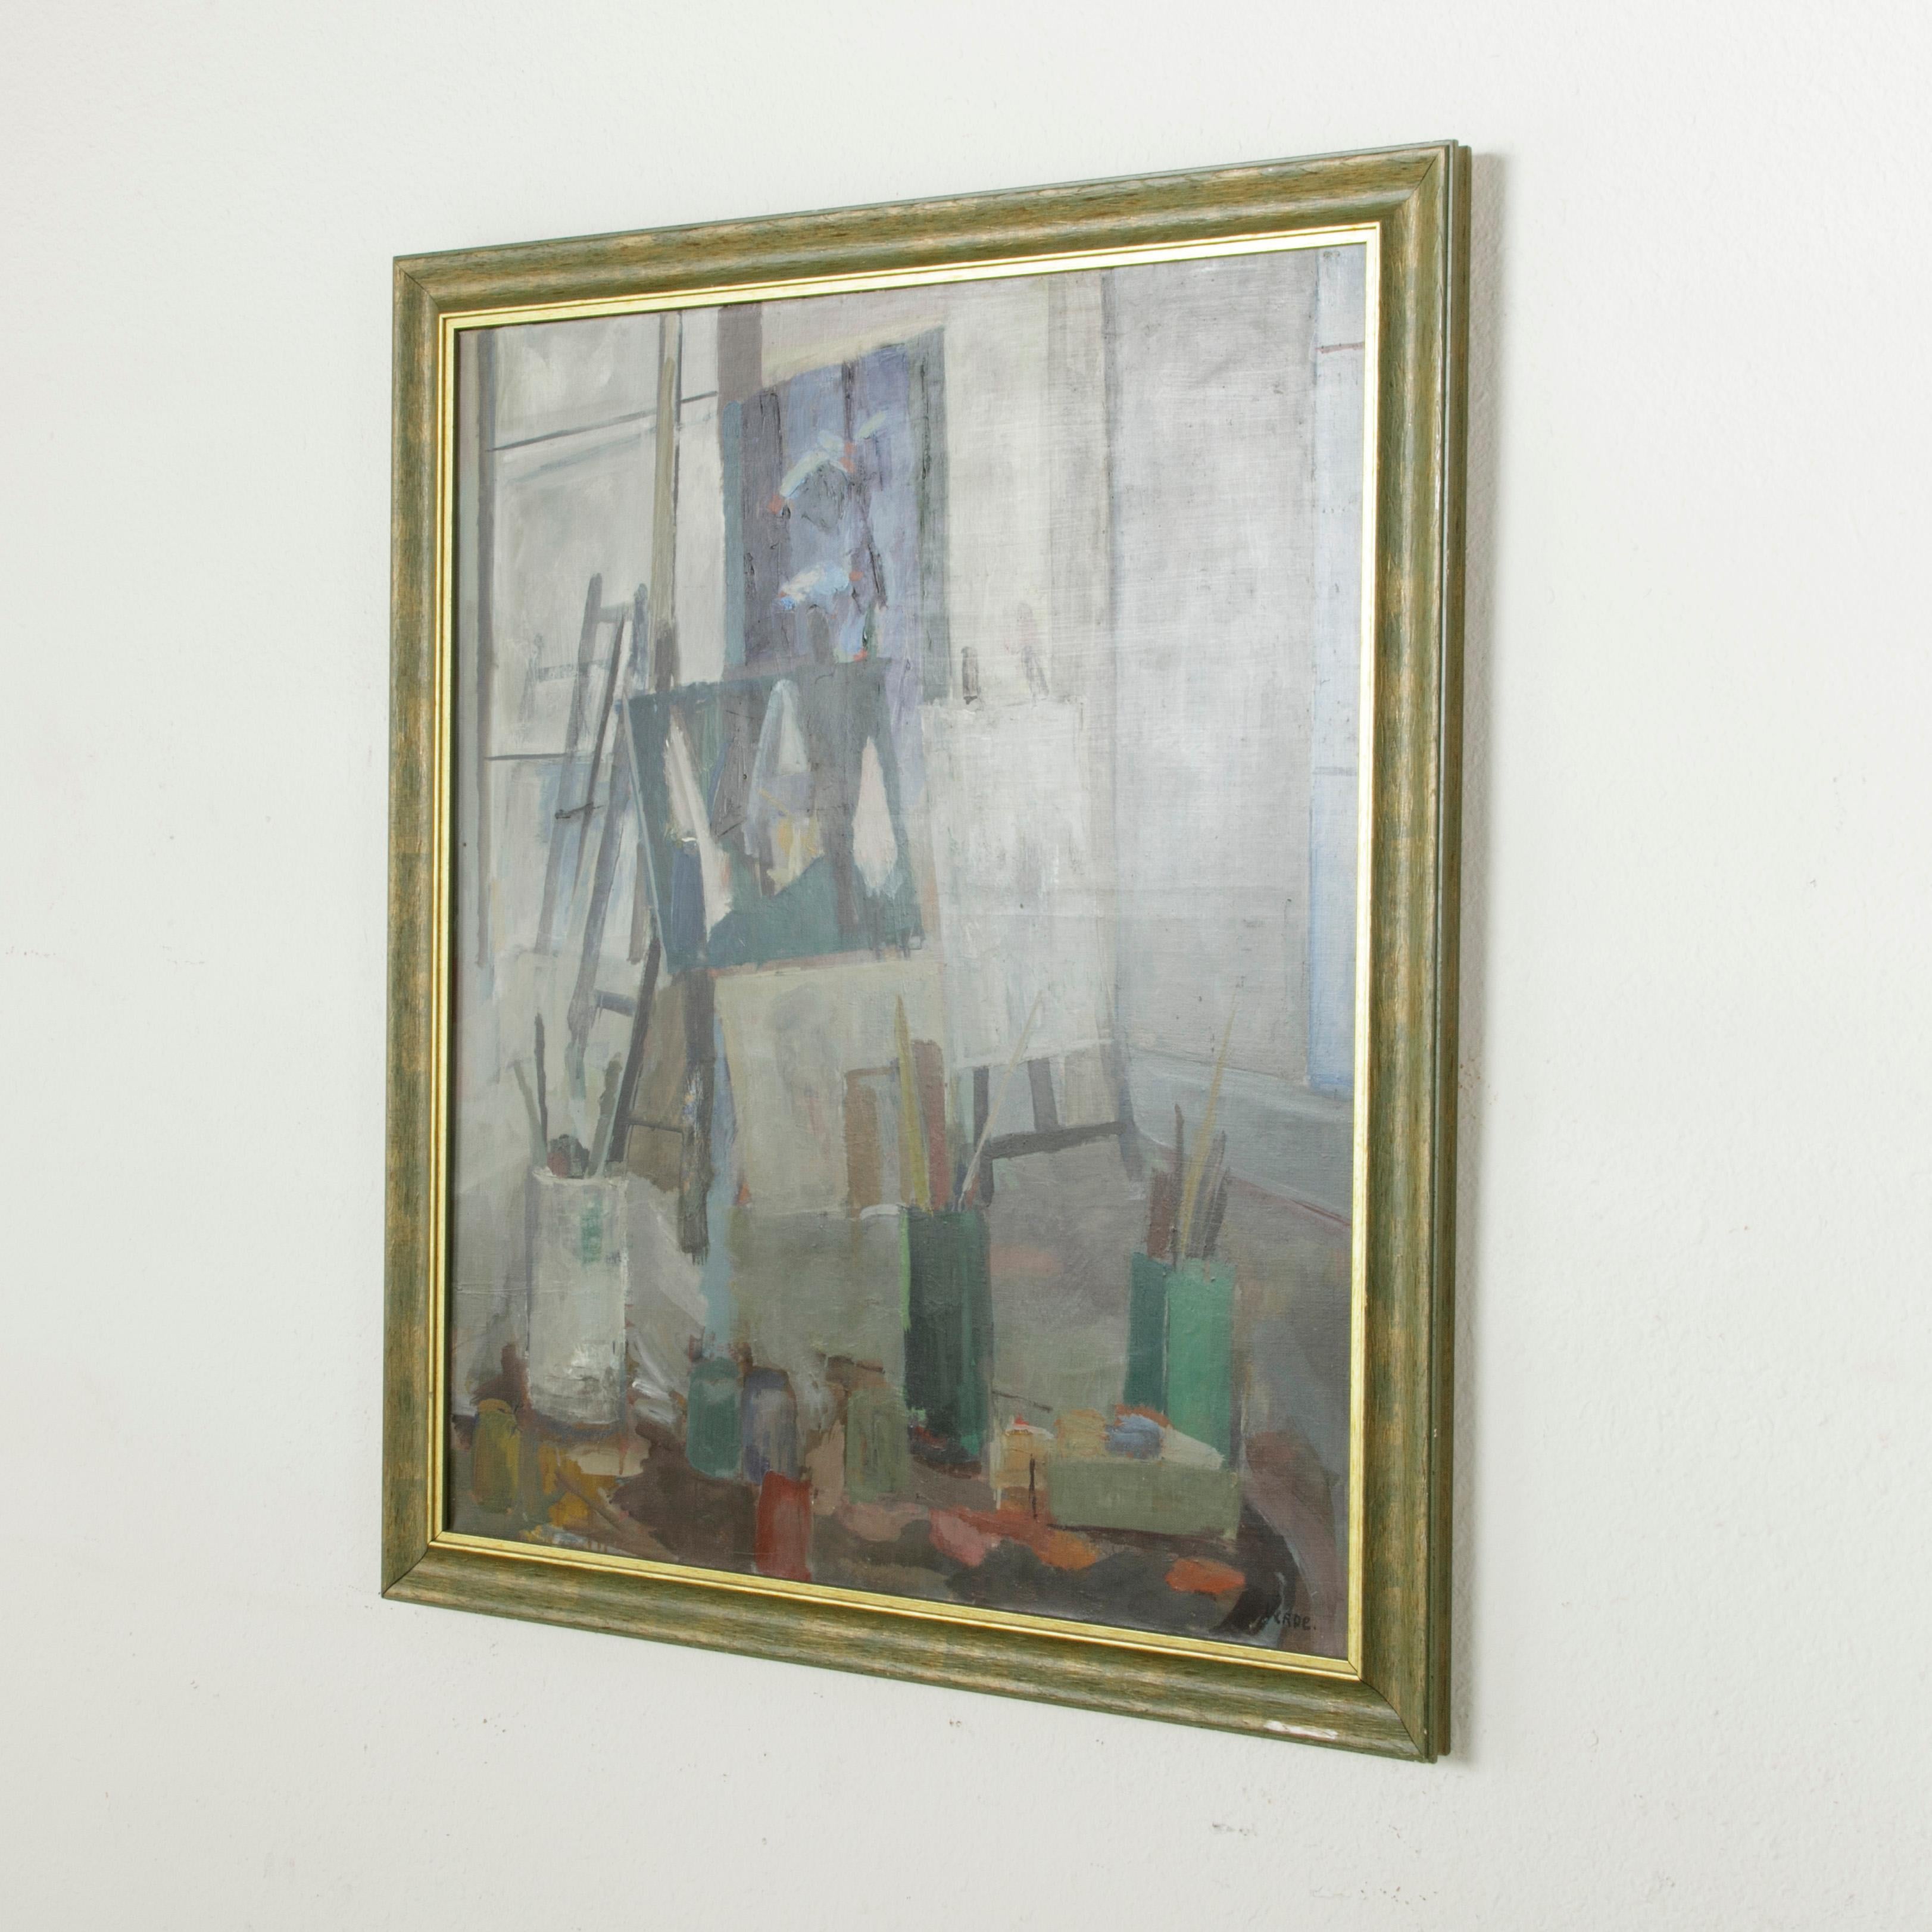 This large scale French oil on canvas painting is signed by the artist, Verde. Displayed on the canvas is a cubist style interpretation of the artist's studio. Represented are the brushes, easels, and half-finished canvases of the artist with large